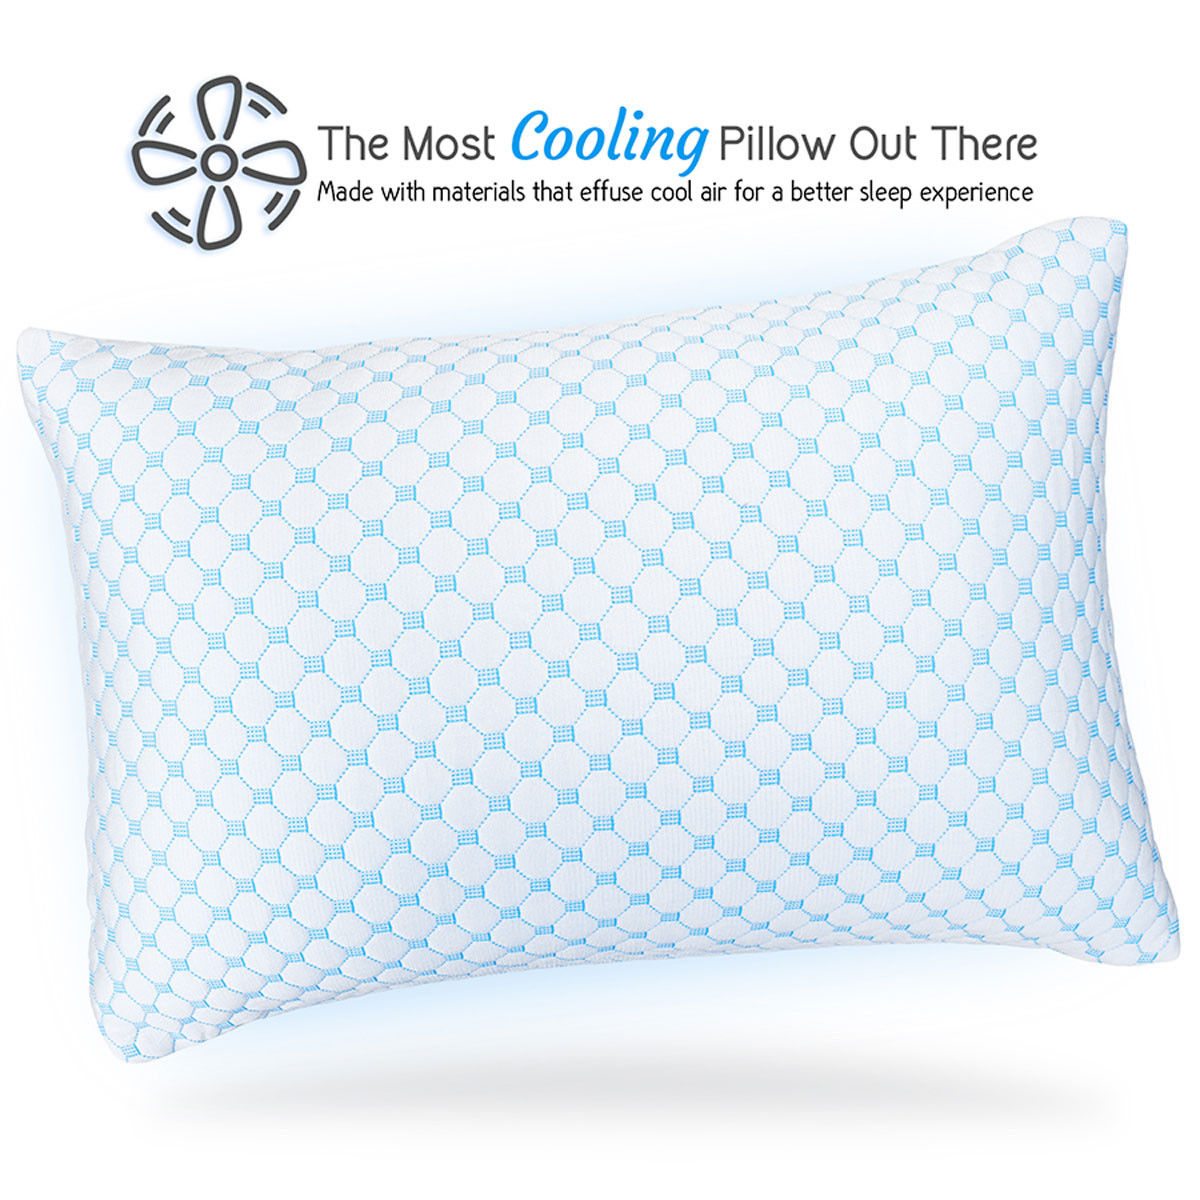 Is the Clara Clark Reversible Cooling pillow adjustable for comfort?